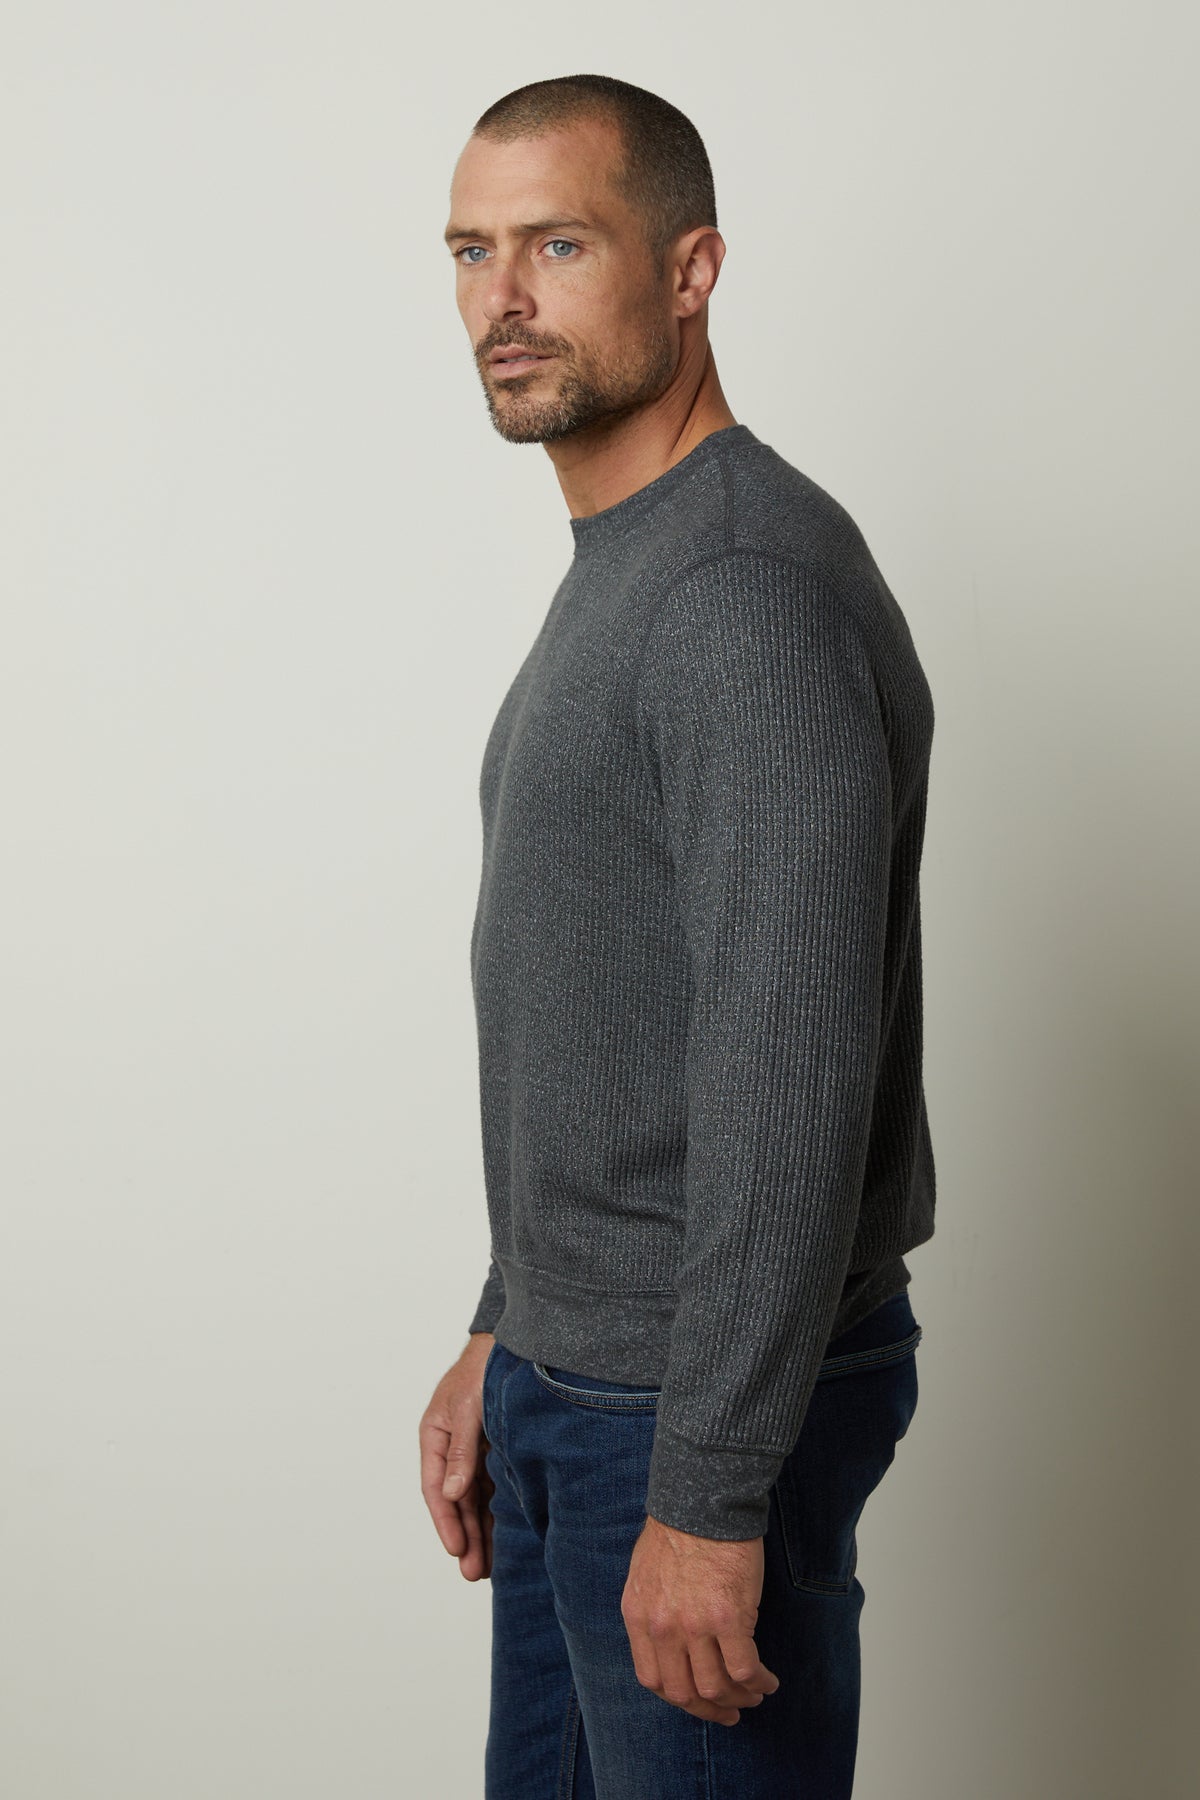 A man wearing a grey Velvet by Graham & Spencer sweater and jeans is perfect for cooler days, especially with the PONCHO THERMAL CREW style.-35547551531201